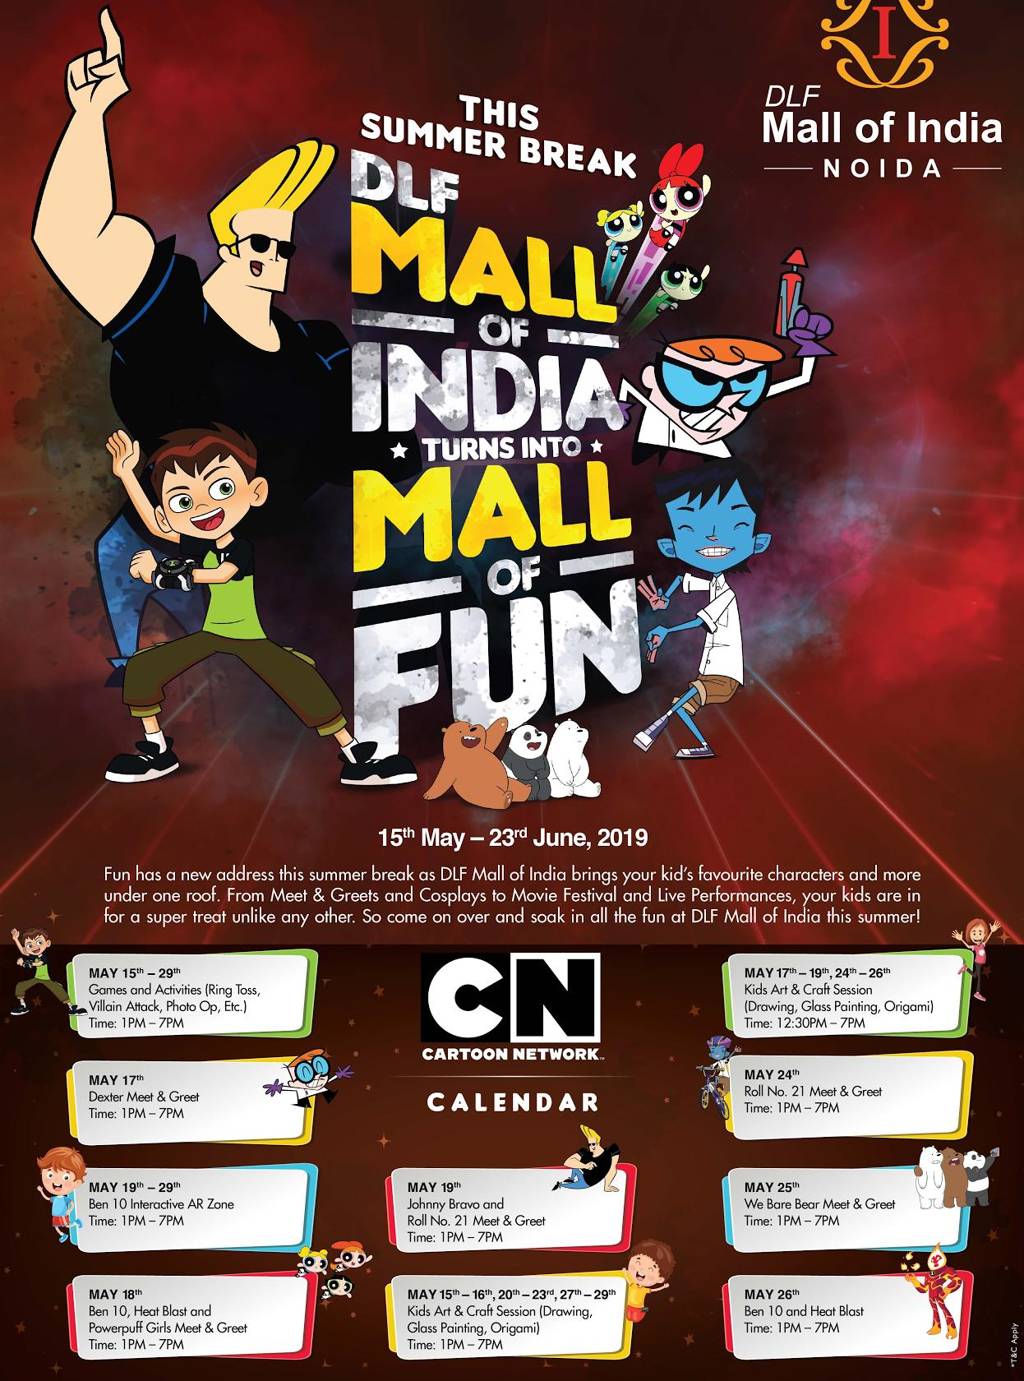 It's 'Hero Time with Cartoon Network' at DLF Mall of India | Events in  Delhi NCR 